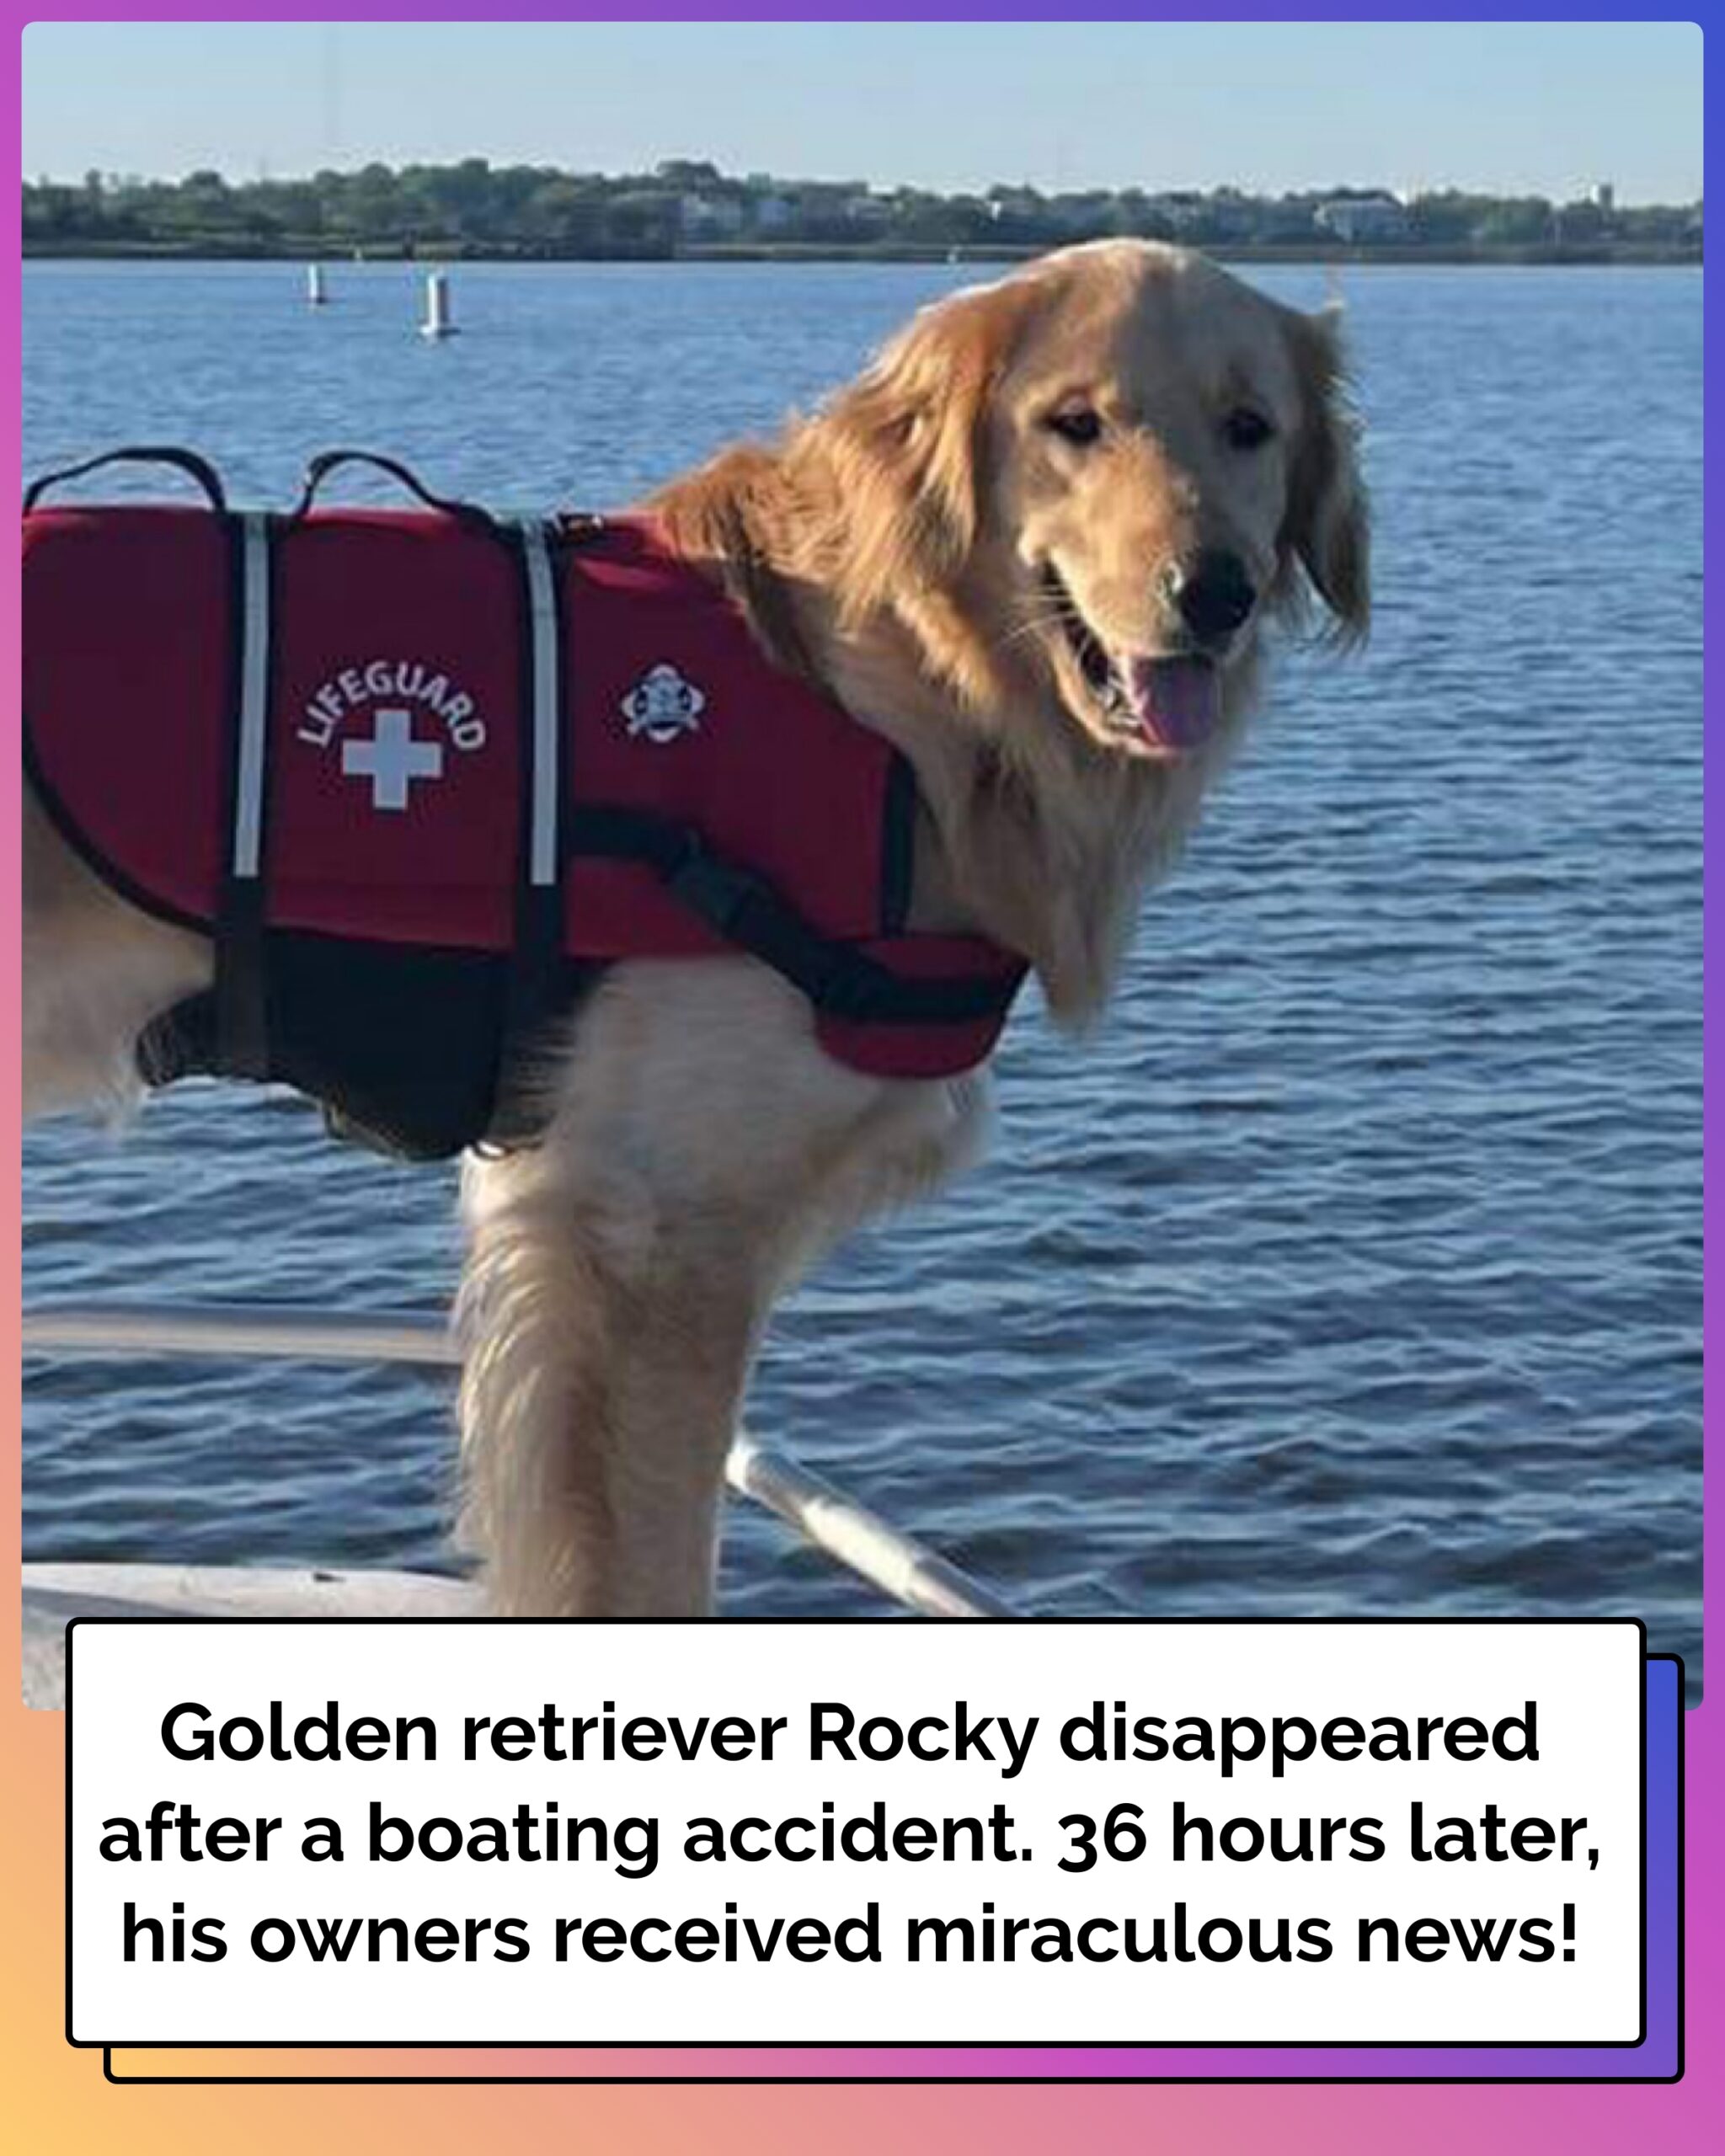 Golden Retriever Disappeared in River After Boating Accident — 36 Hours Later Owners Get Miracle News